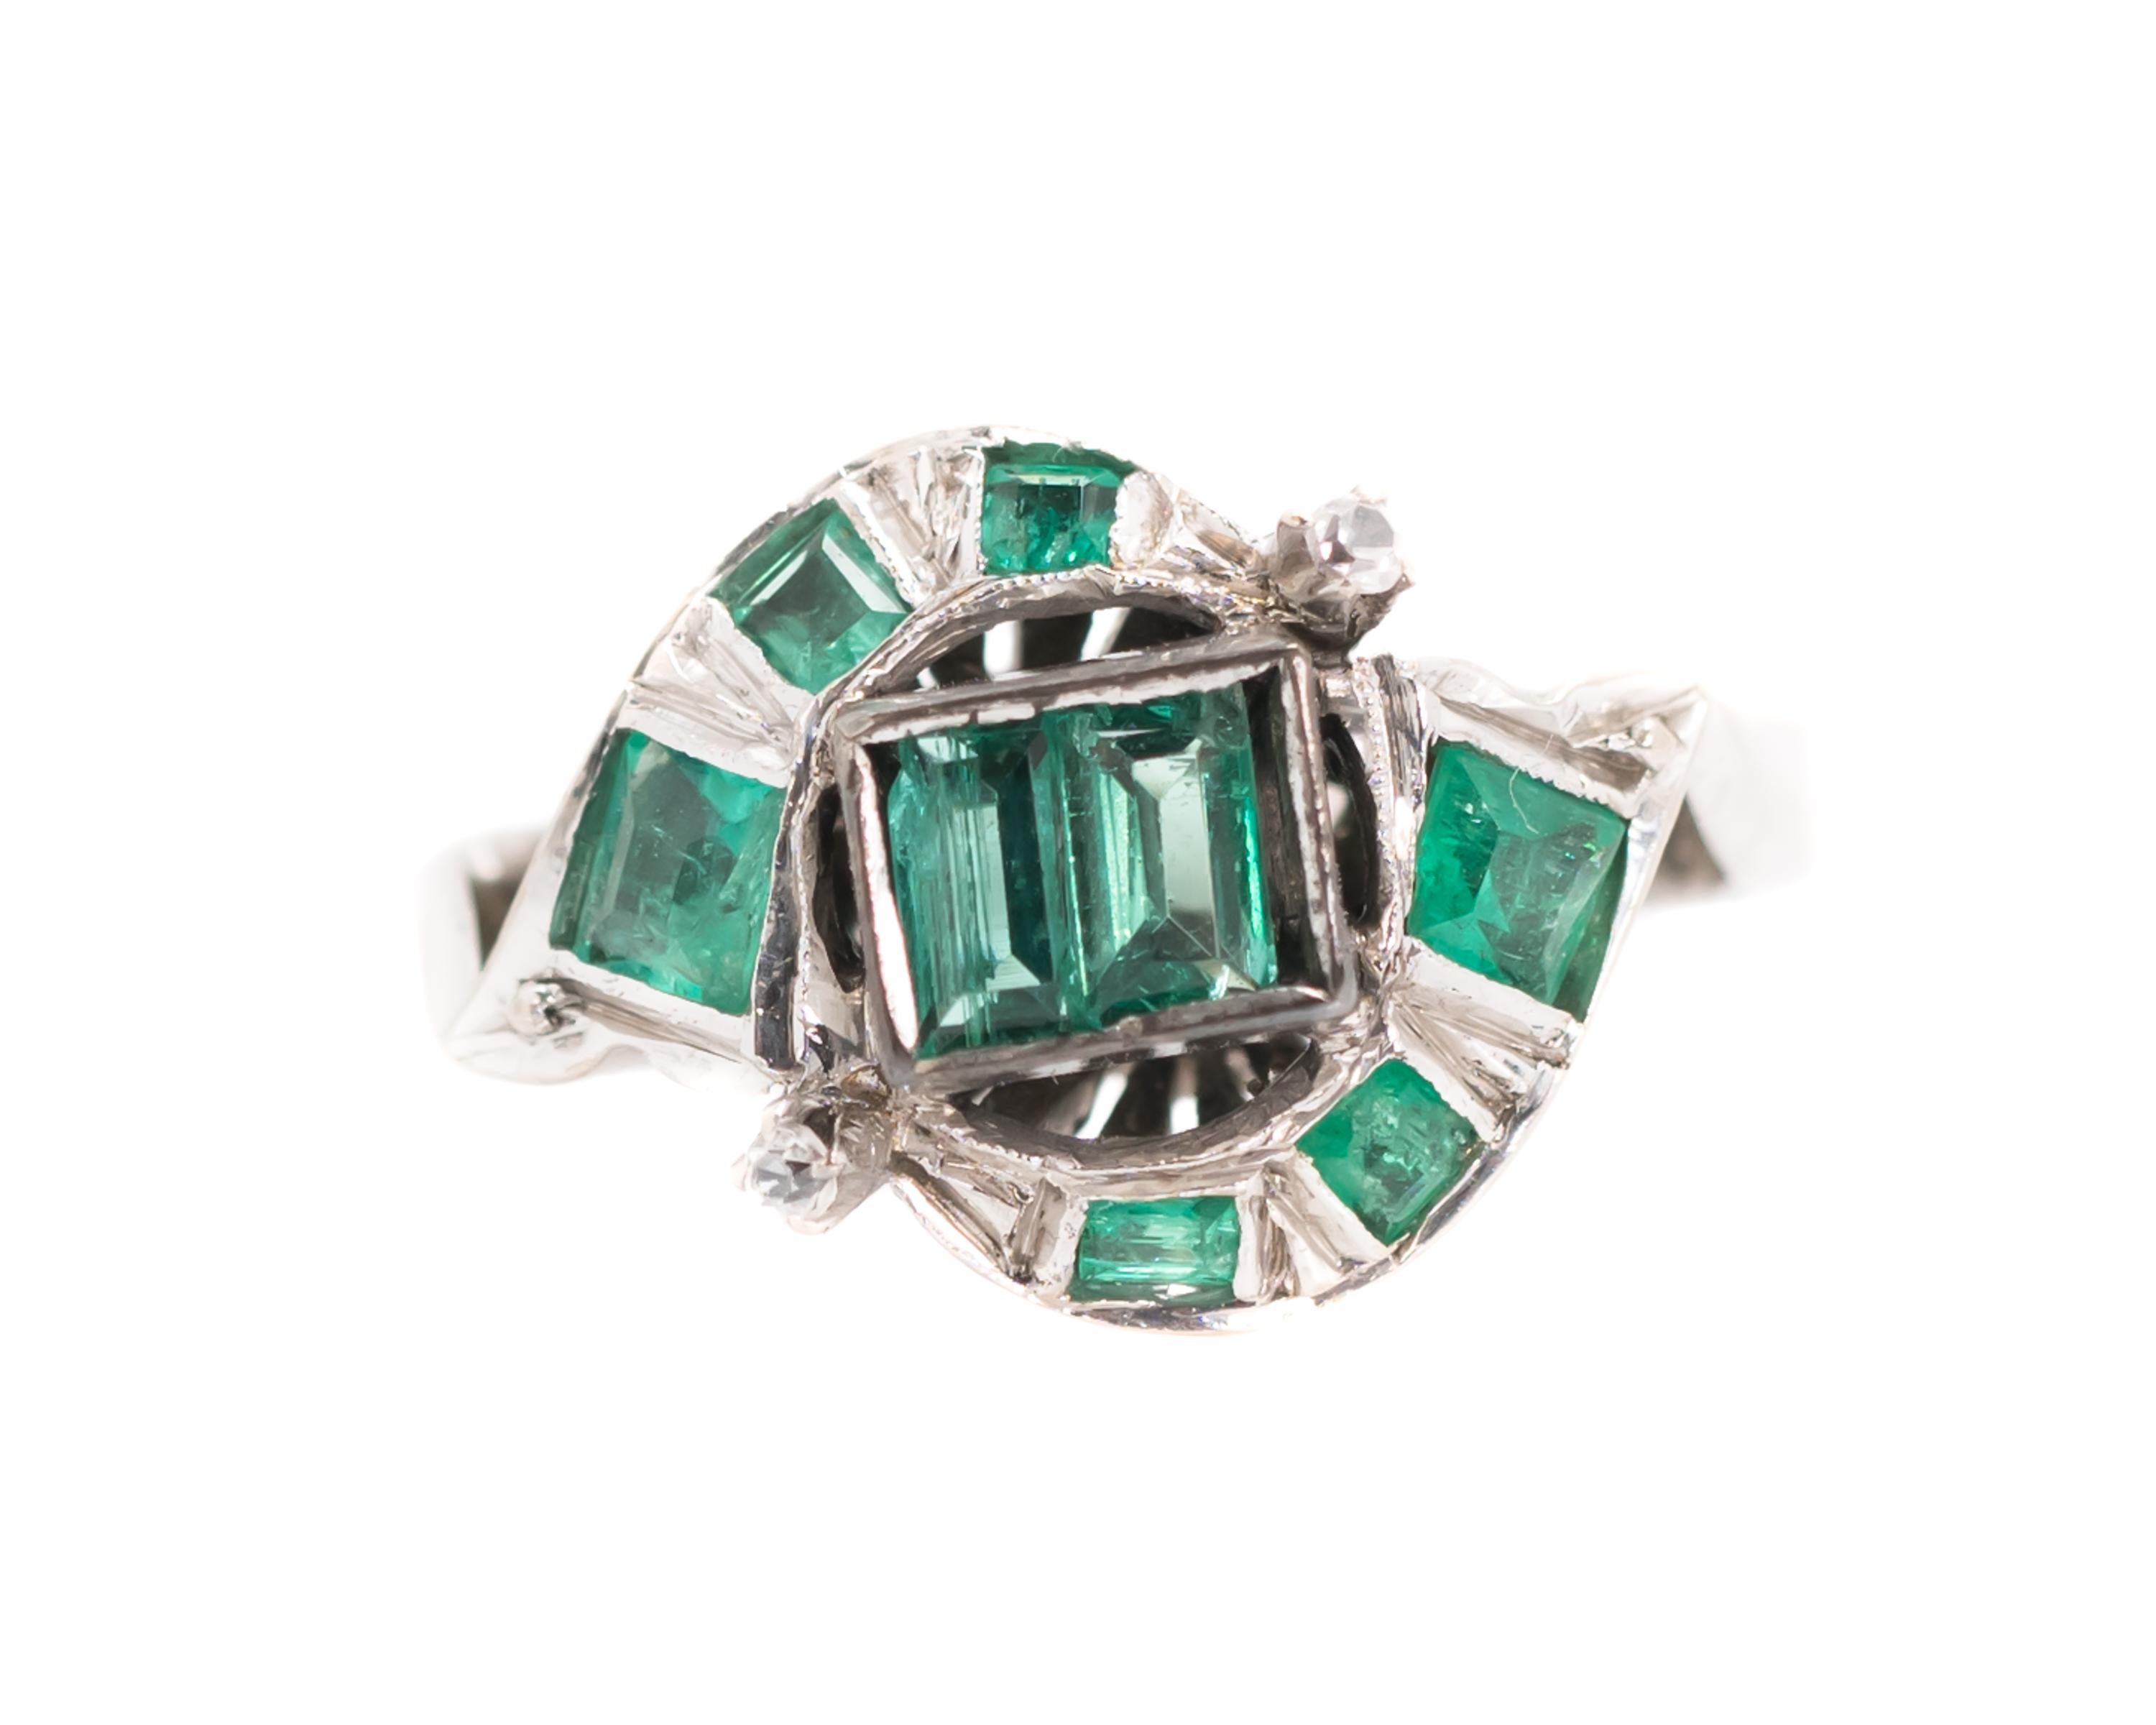 1920s Art Deco Bypass Ring - 18 Karat White Gold, Colombian Emeralds, Old Mine cut White Sapphires

Features 0.75 Carats Colombian Emeralds set in 18 Karat White Gold. A pair of Emerald cut Emeralds are bezel set at the ring's center. 6 more